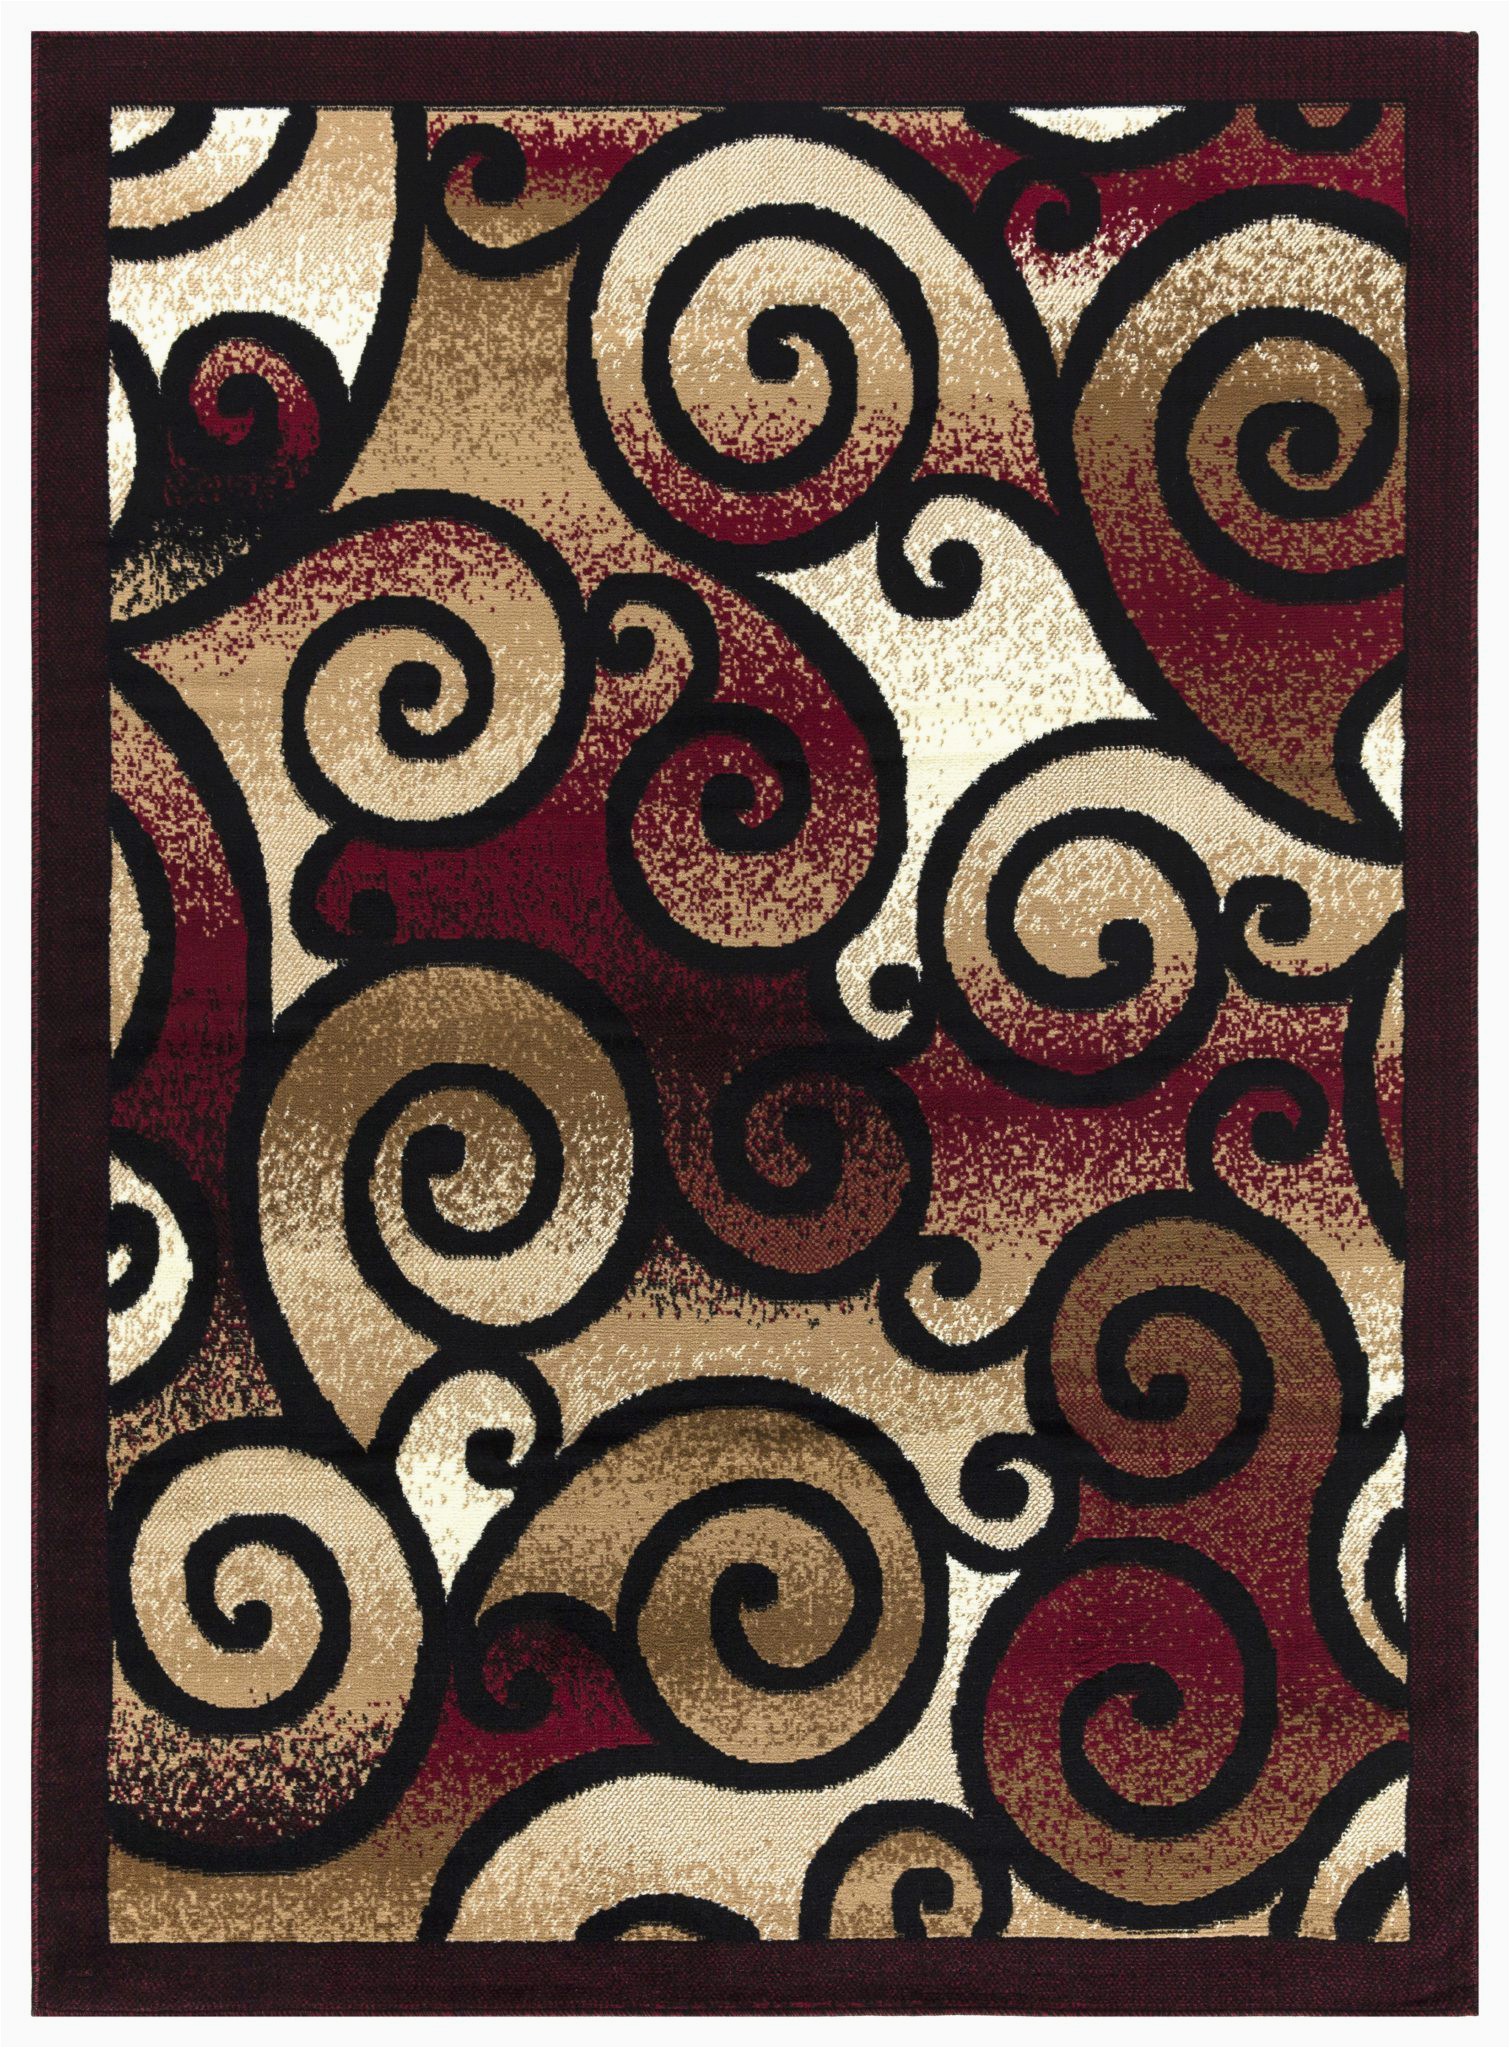 Burgundy and Beige area Rugs Princess Collection Geometric Swirl Abstract area Rug 806 Burgundy & Black – Beverly Rug